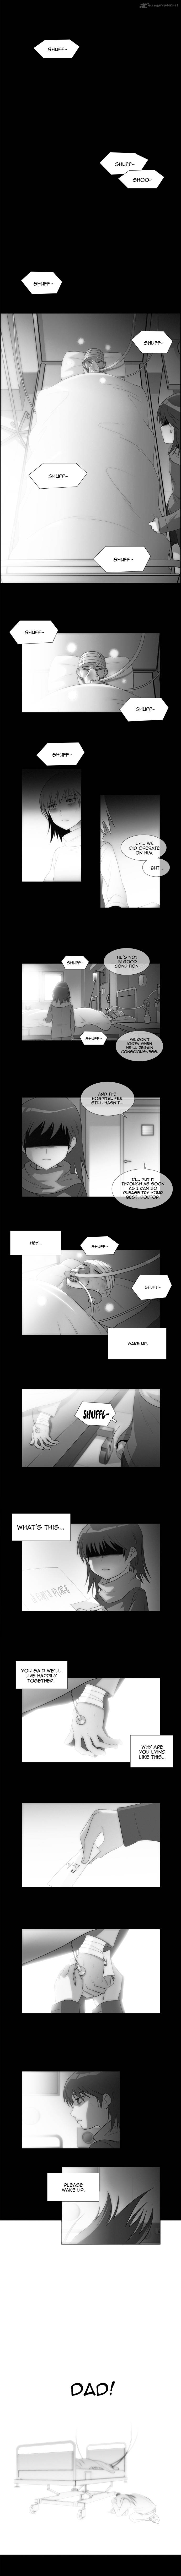 Melo Holic Chapter 43 Page 1